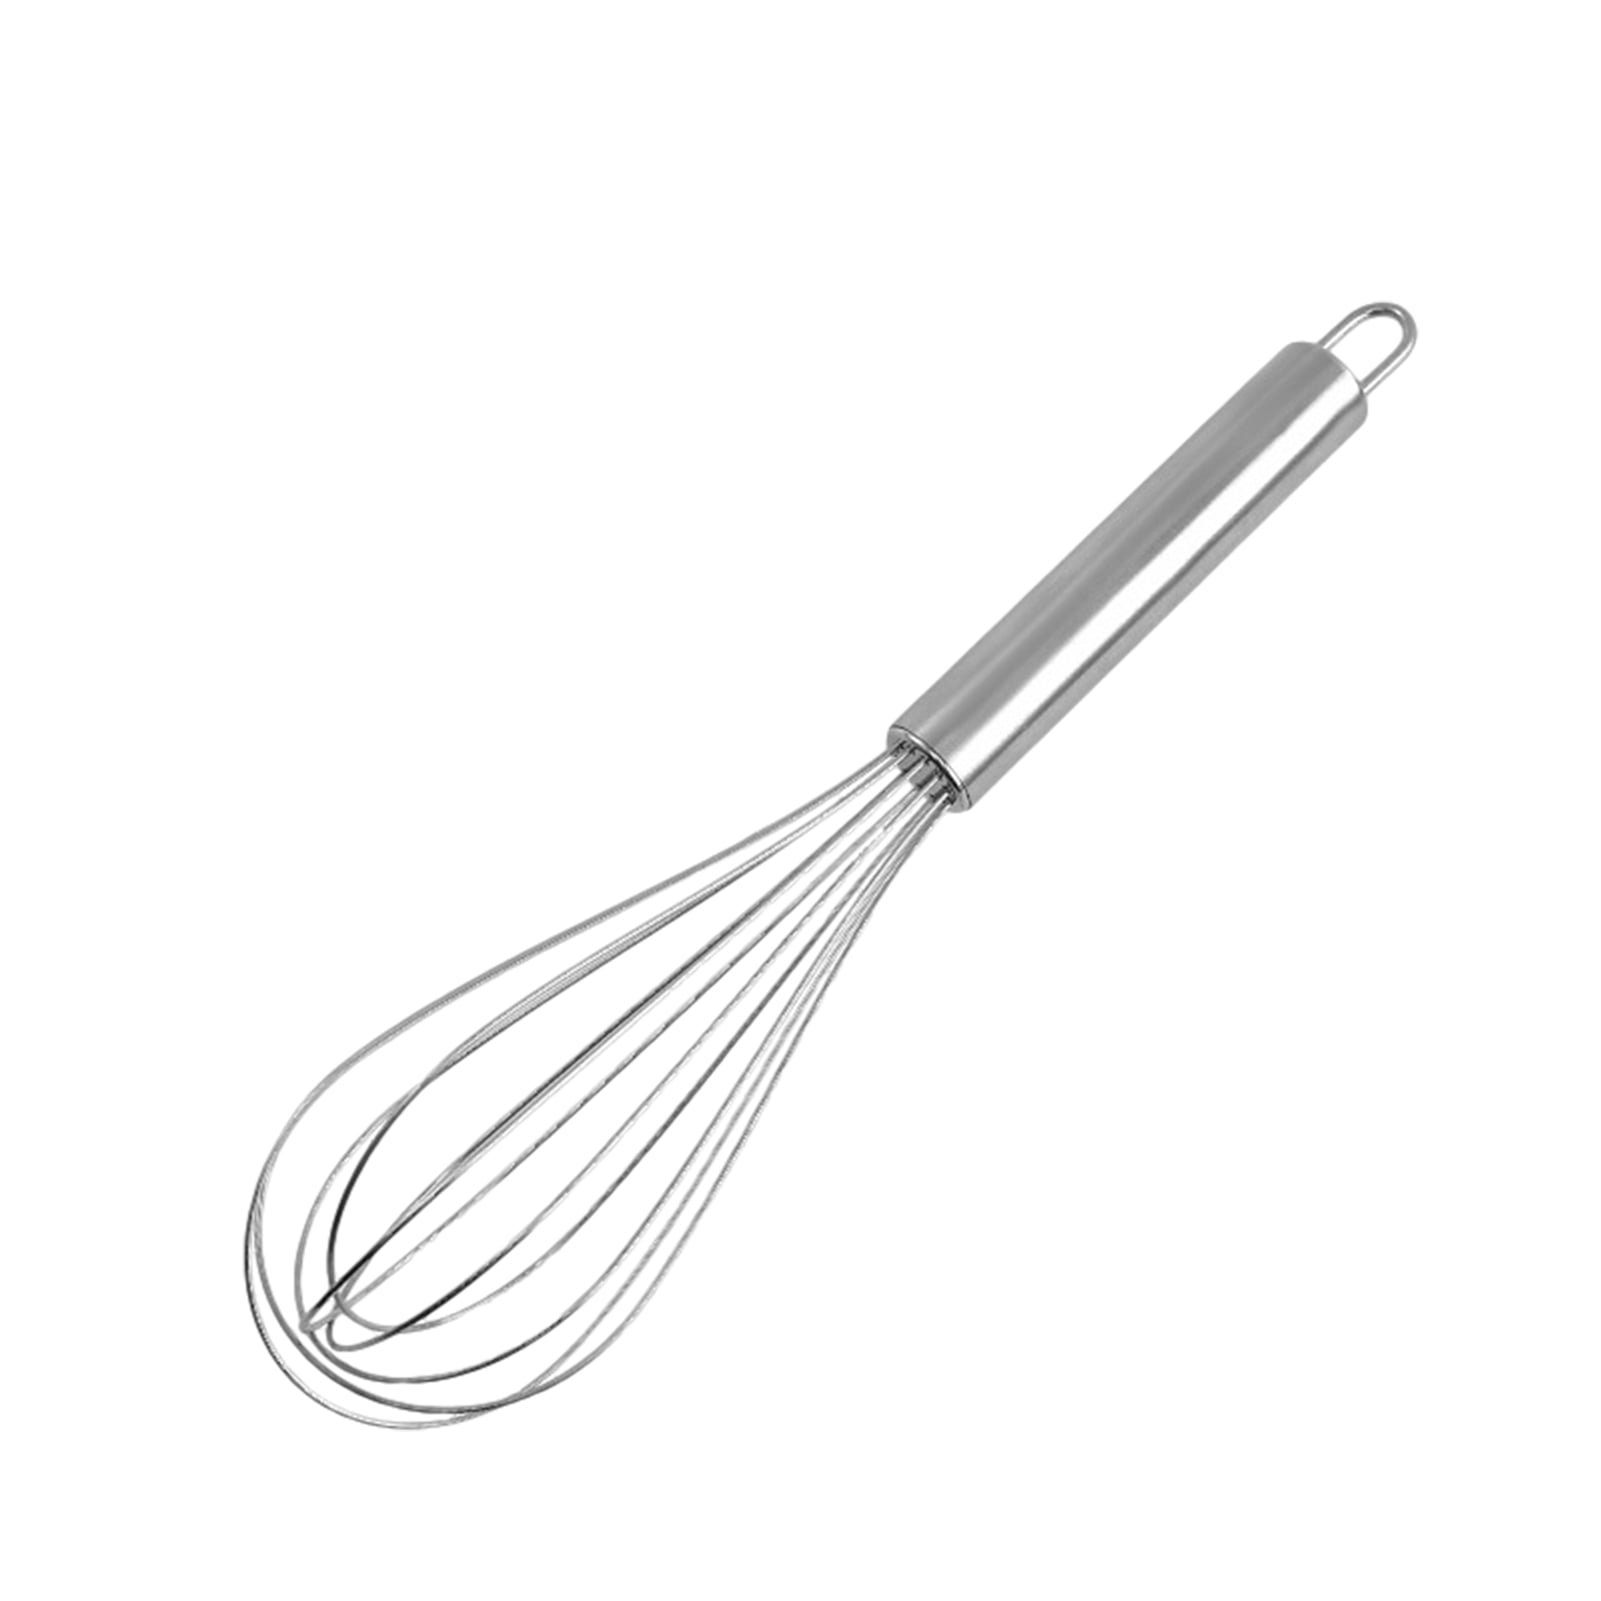 JuLam Stainless Steel Whisks Wire Whisk Set Kitchen wisks for Cooking,  Blending, Whisking, Beating